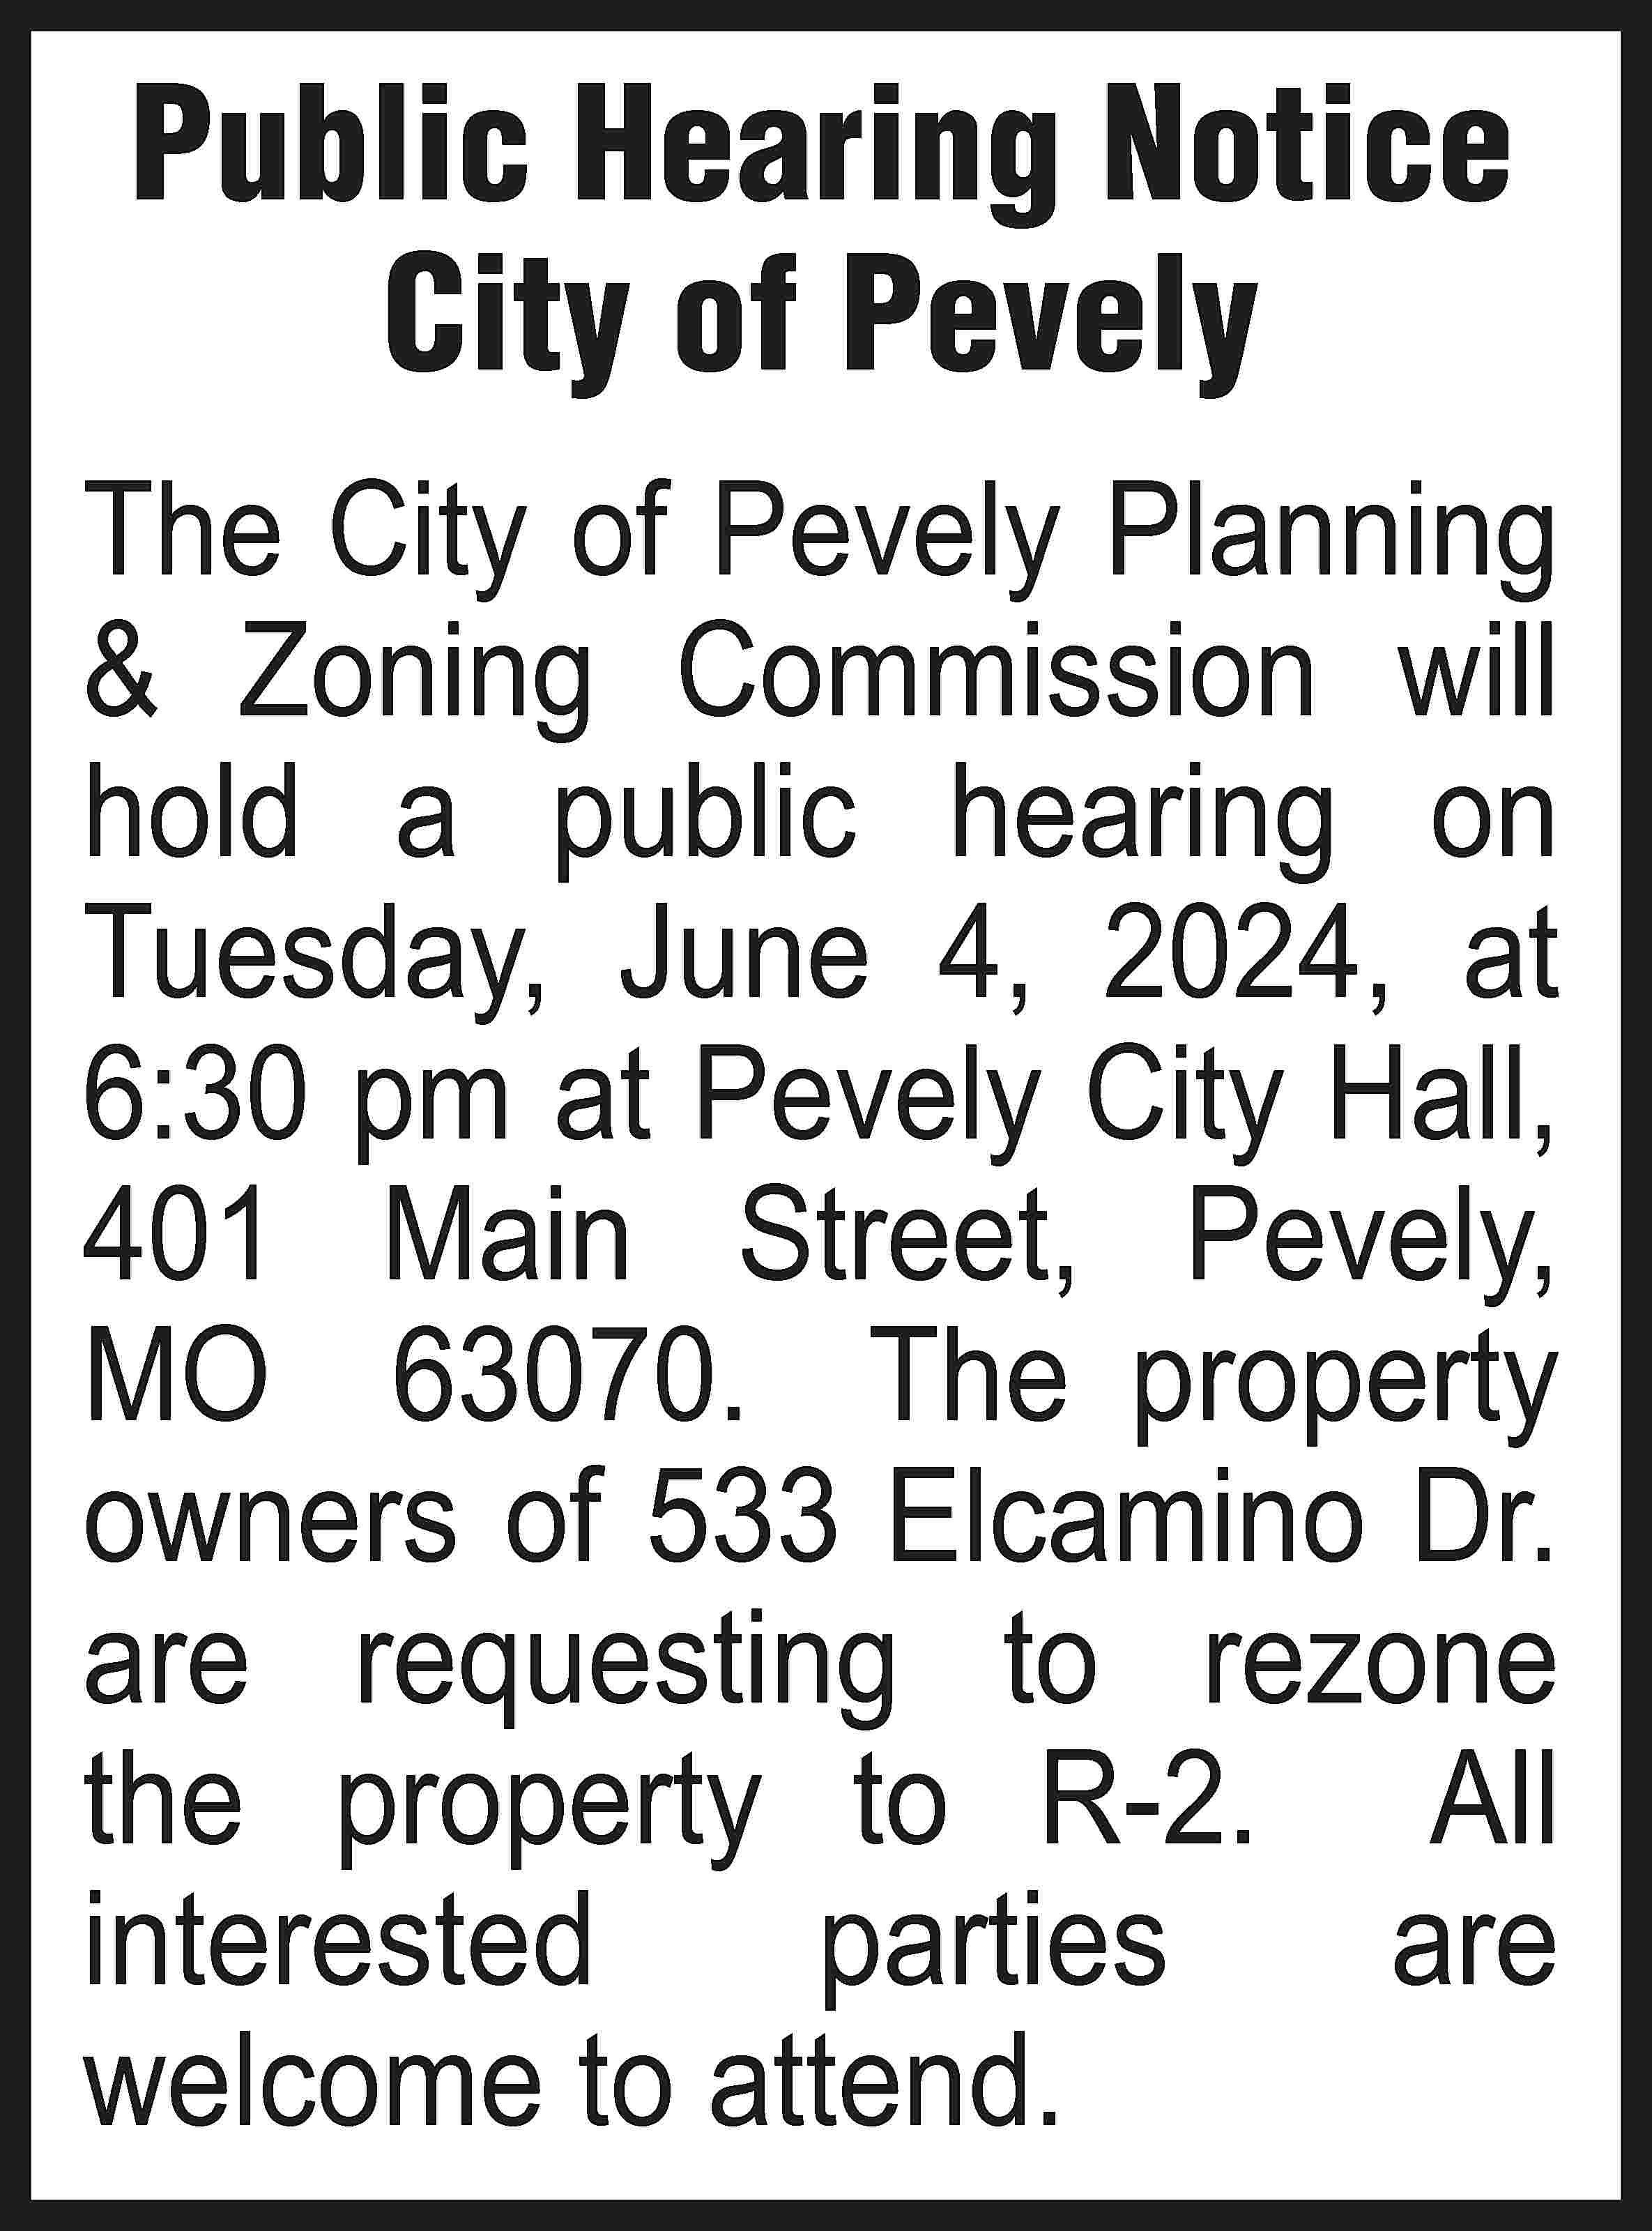 Public Hearing Notice City of  Public Hearing Notice City of Pevely The City of Pevely Planning & Zoning Commission will hold a public hearing on Tuesday, June 4, 2024, at 6:30 pm at Pevely City Hall, 401 Main Street, Pevely, MO 63070. The property owners of 533 Elcamino Dr. are requesting to rezone the property to R-2. All interested parties are welcome to attend.